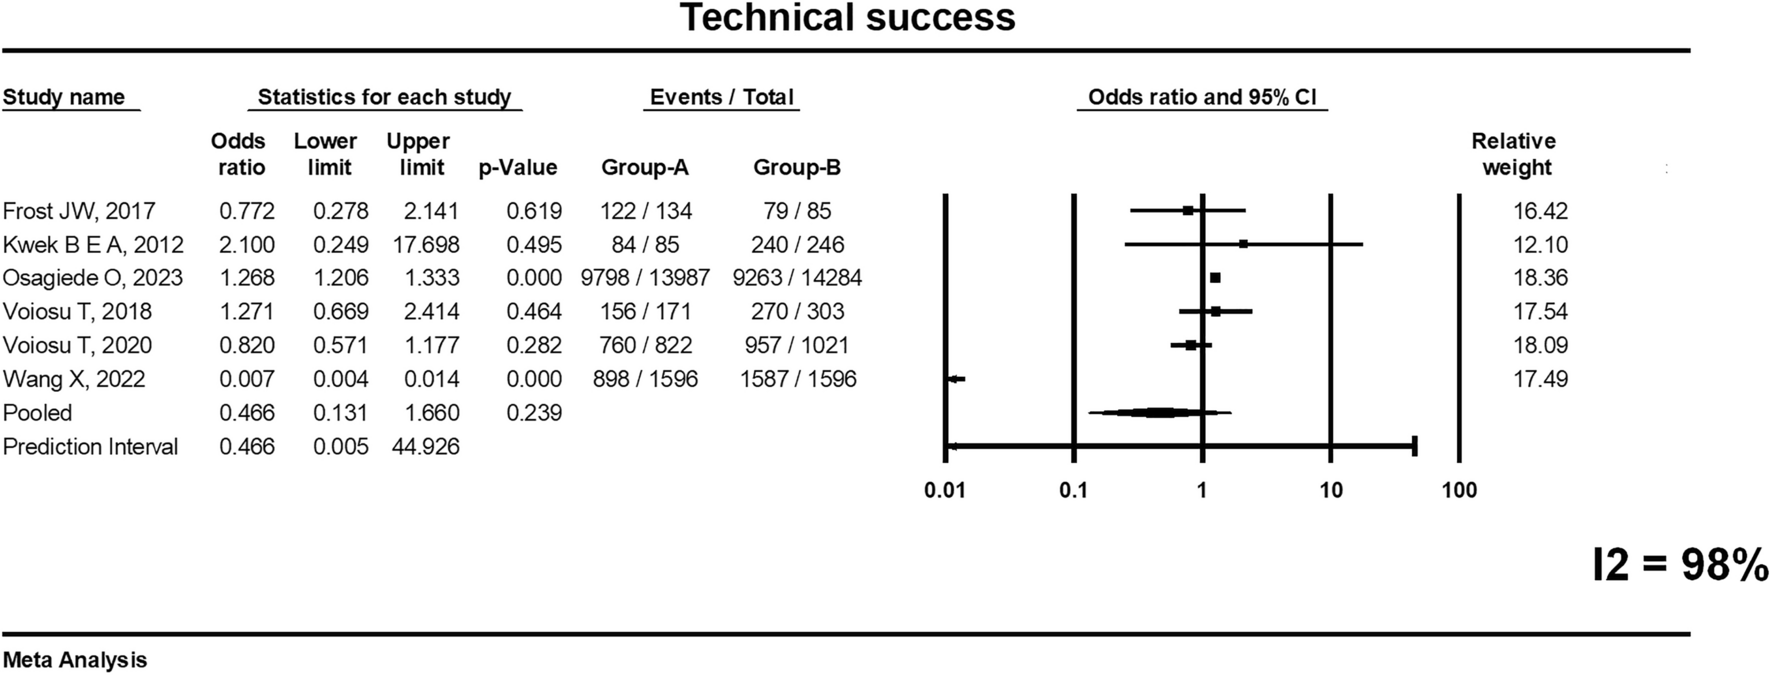 Trainee Involvement and ERCP Complications: A Systematic Review and Meta-Analysis